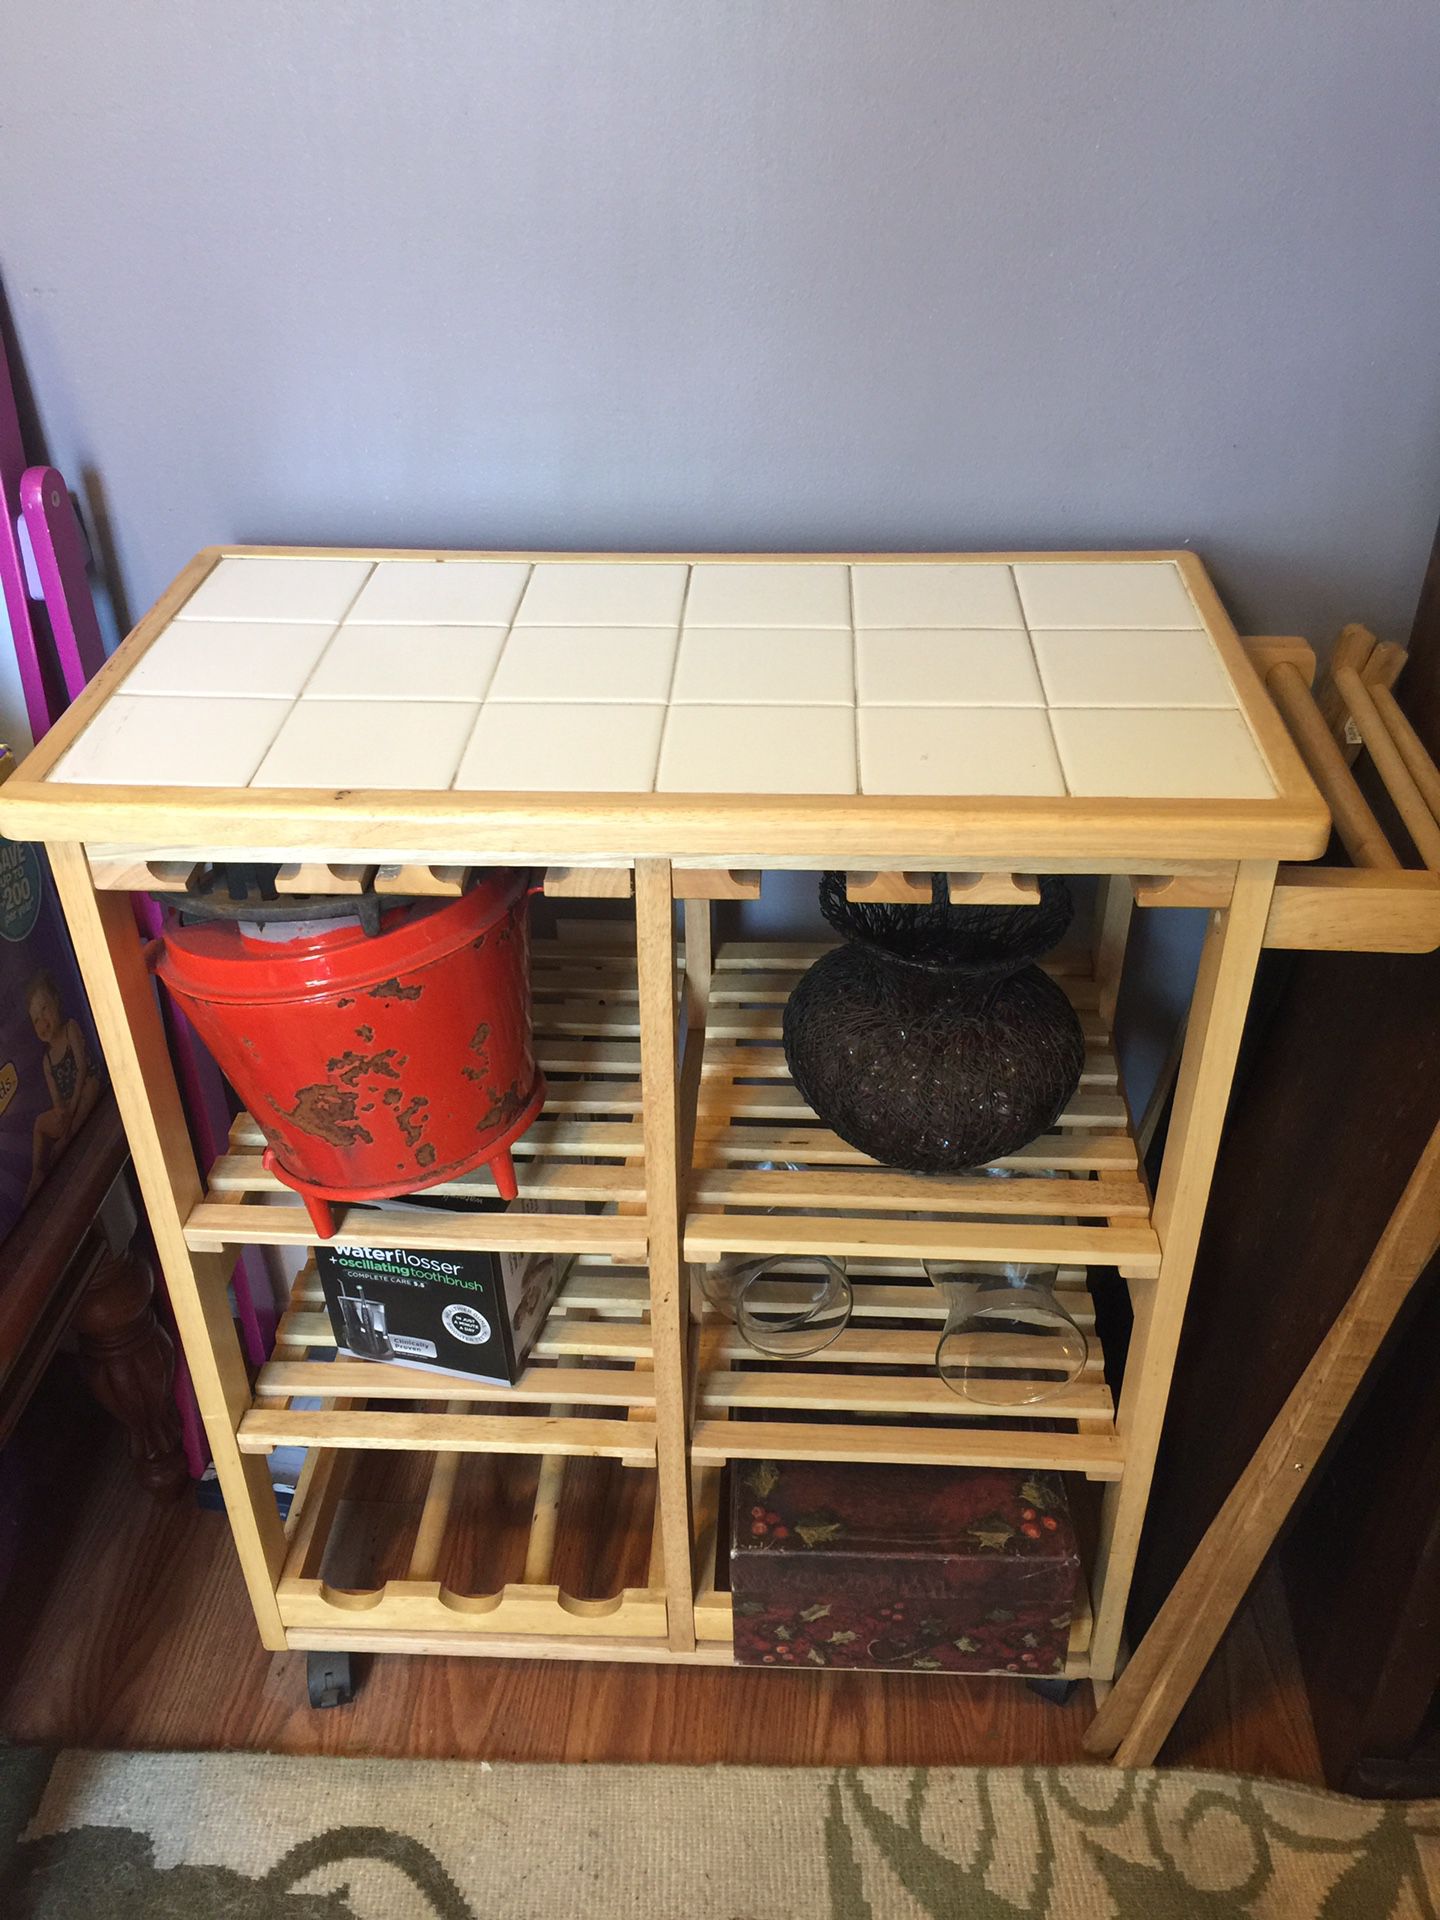 Kitchen cart with wine bottle and glass holders as well as shelves